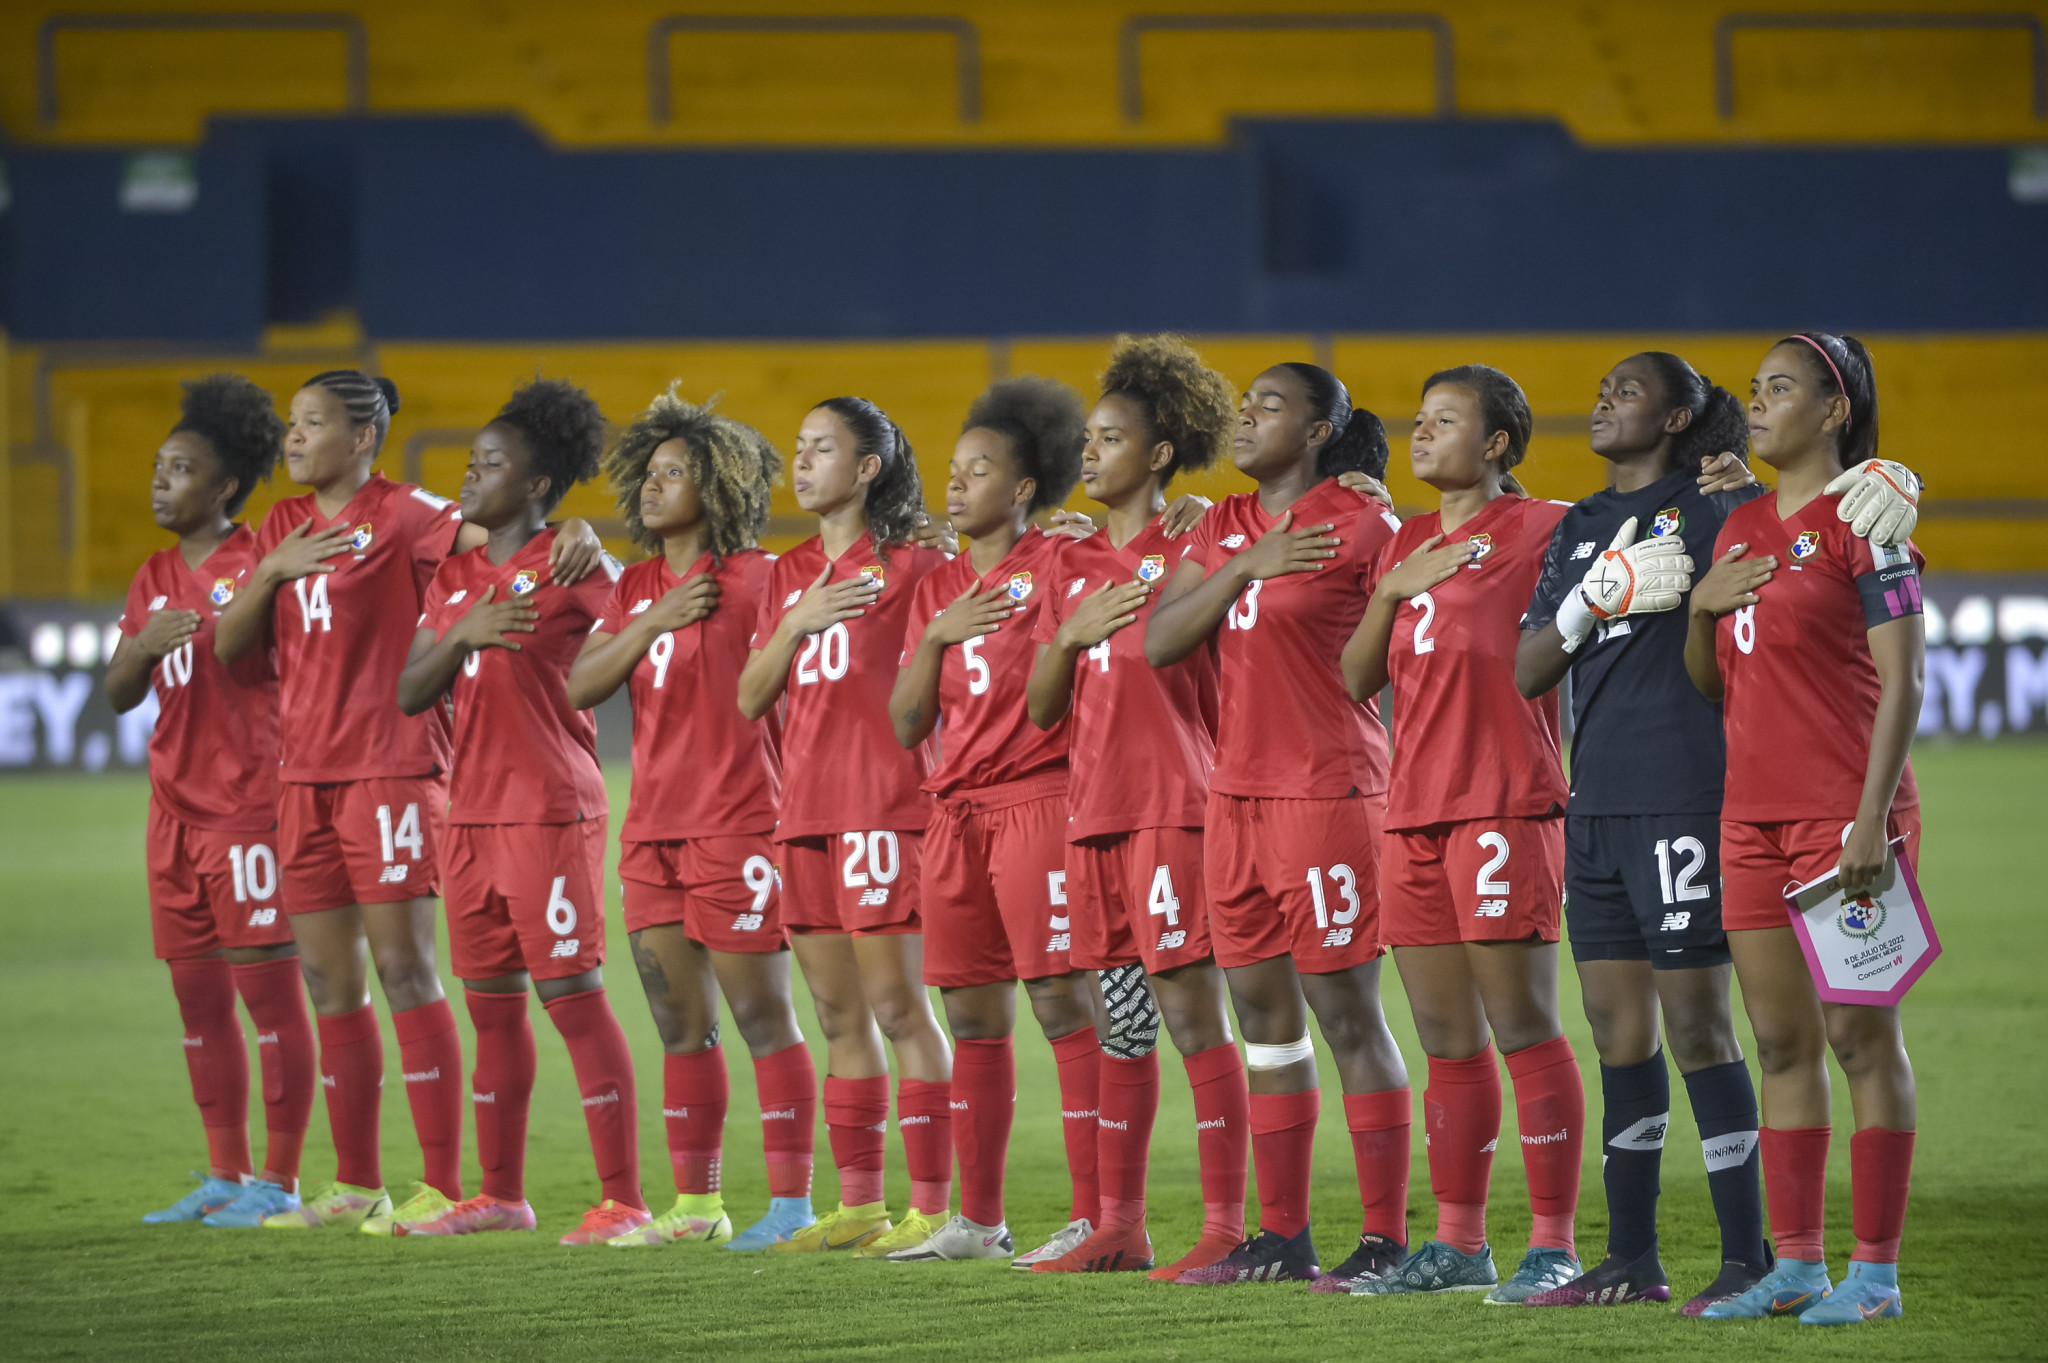 Panama reached the FIFA Women's World Cup for the first time with victory over Paraguay ©Getty Images